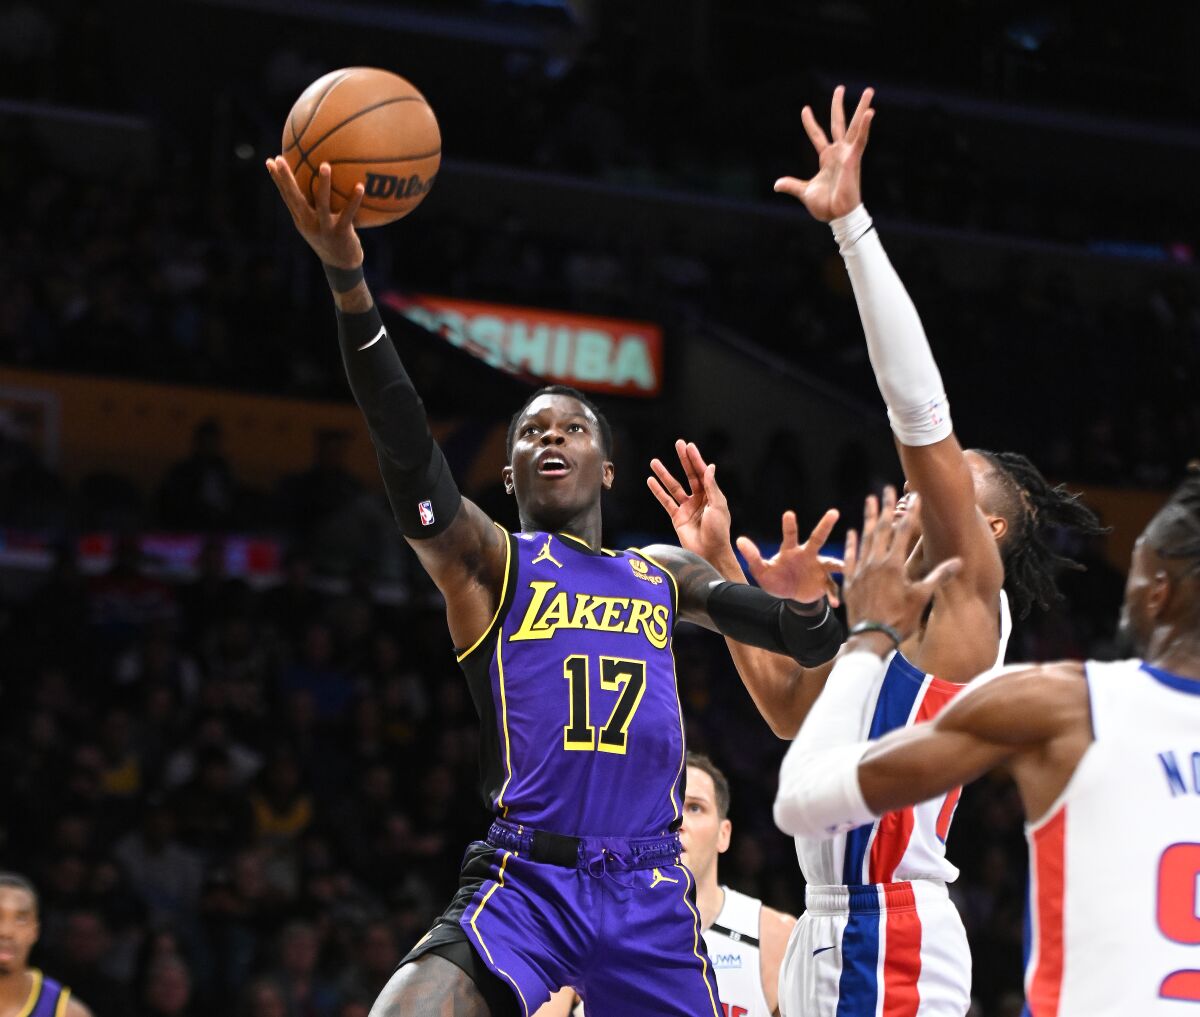 Lakers guard Dennis Schroder drives to the basket against the Pistons.